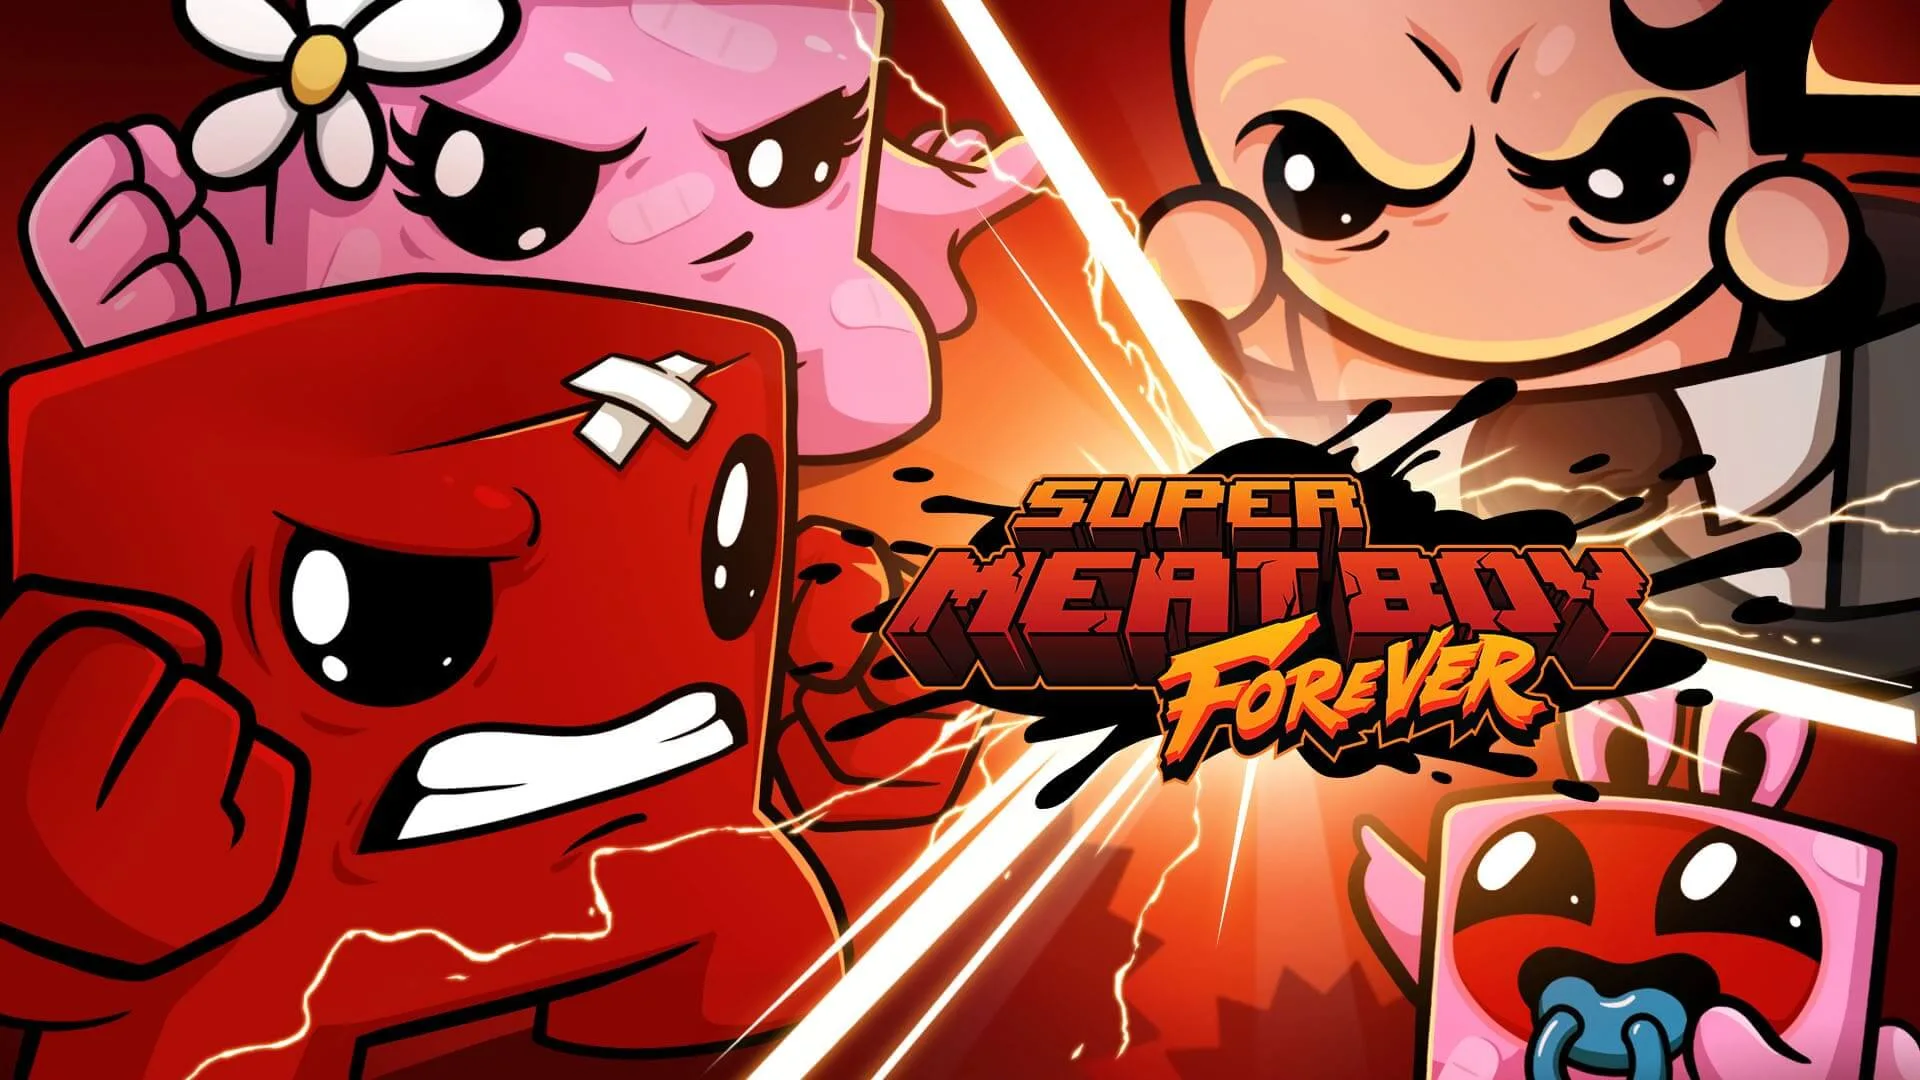 epic games store super meat boy forever